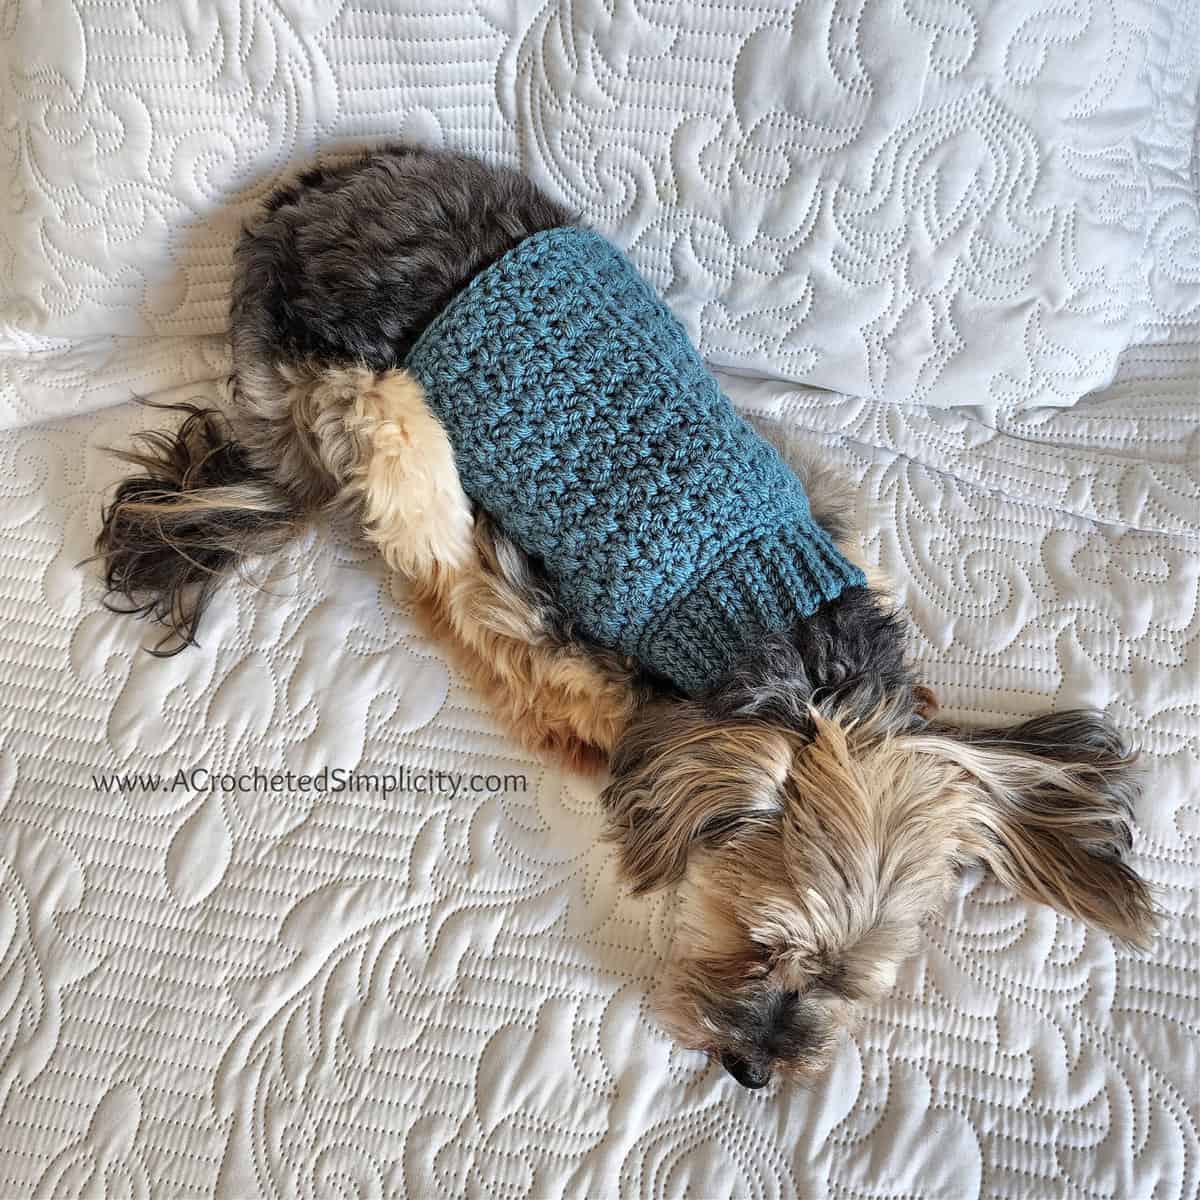 Dog jumper knitting patterns your pet will love